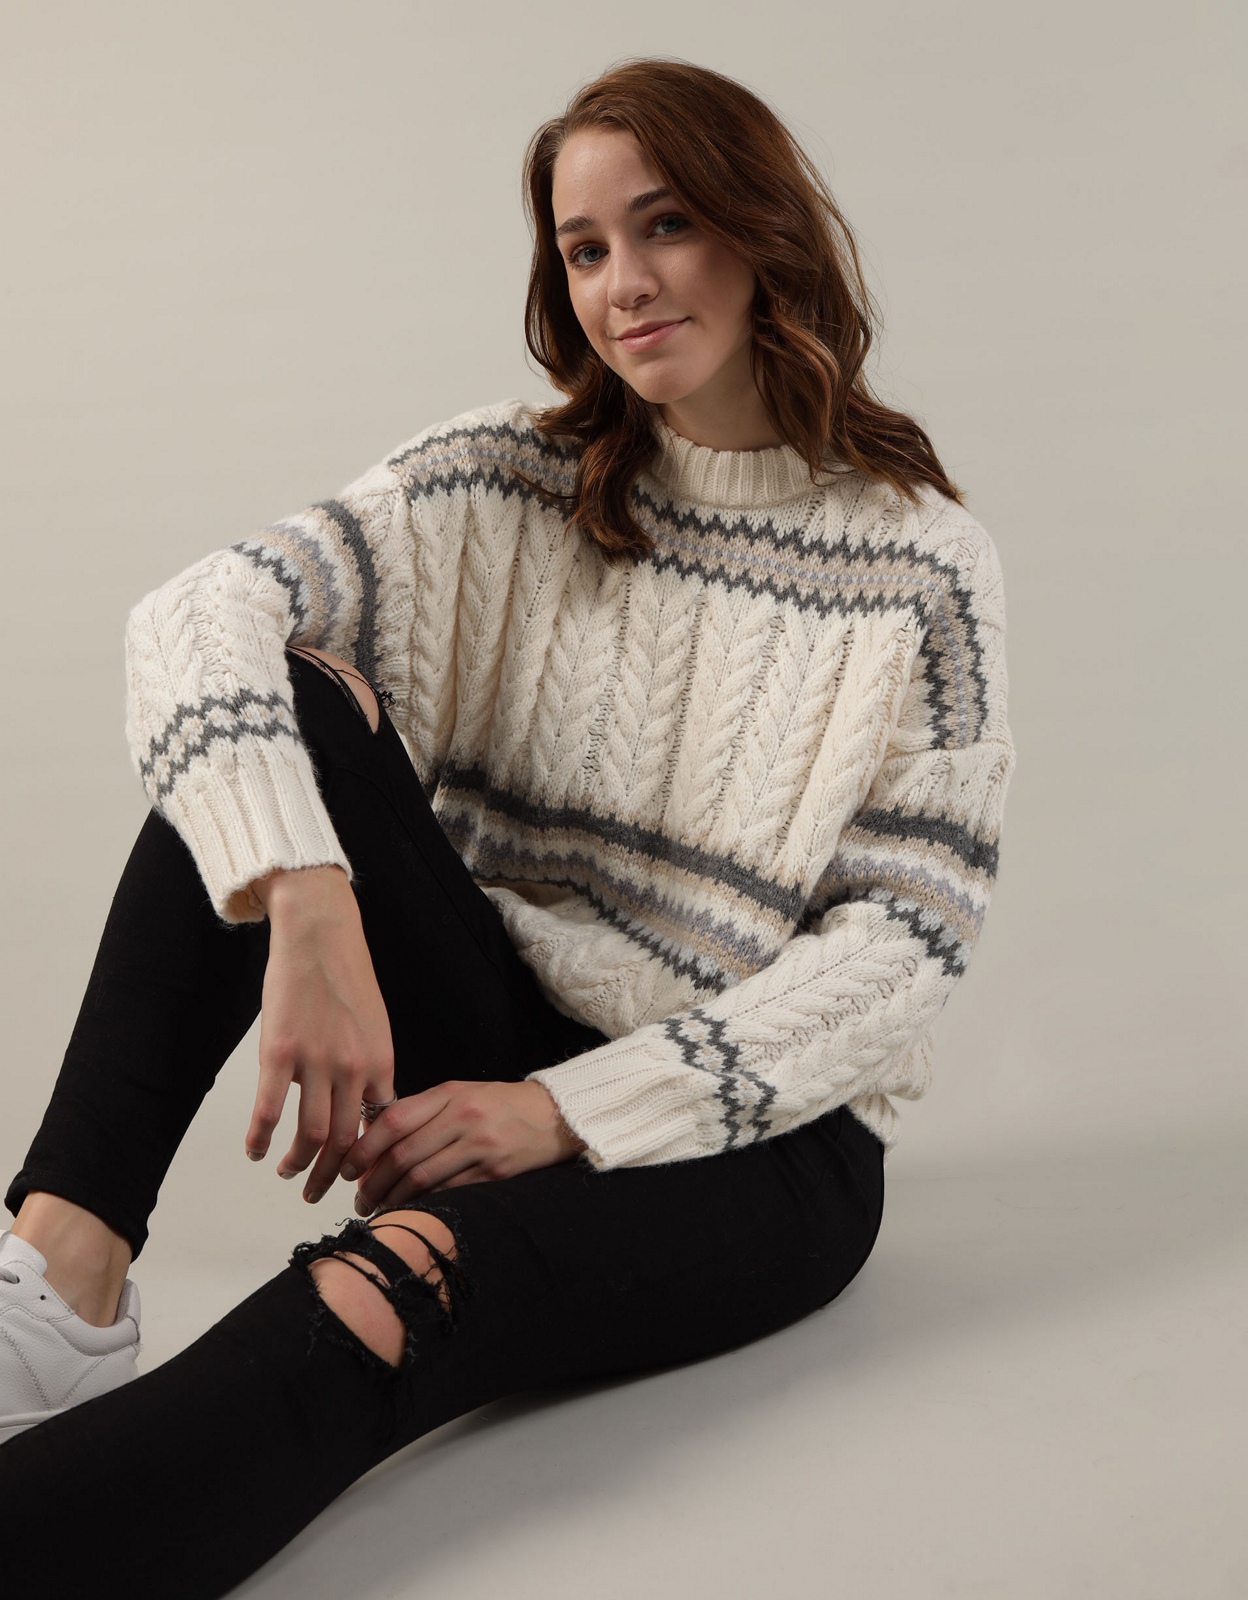 Buy AE Cable-Knit Fair Isle Sweater online